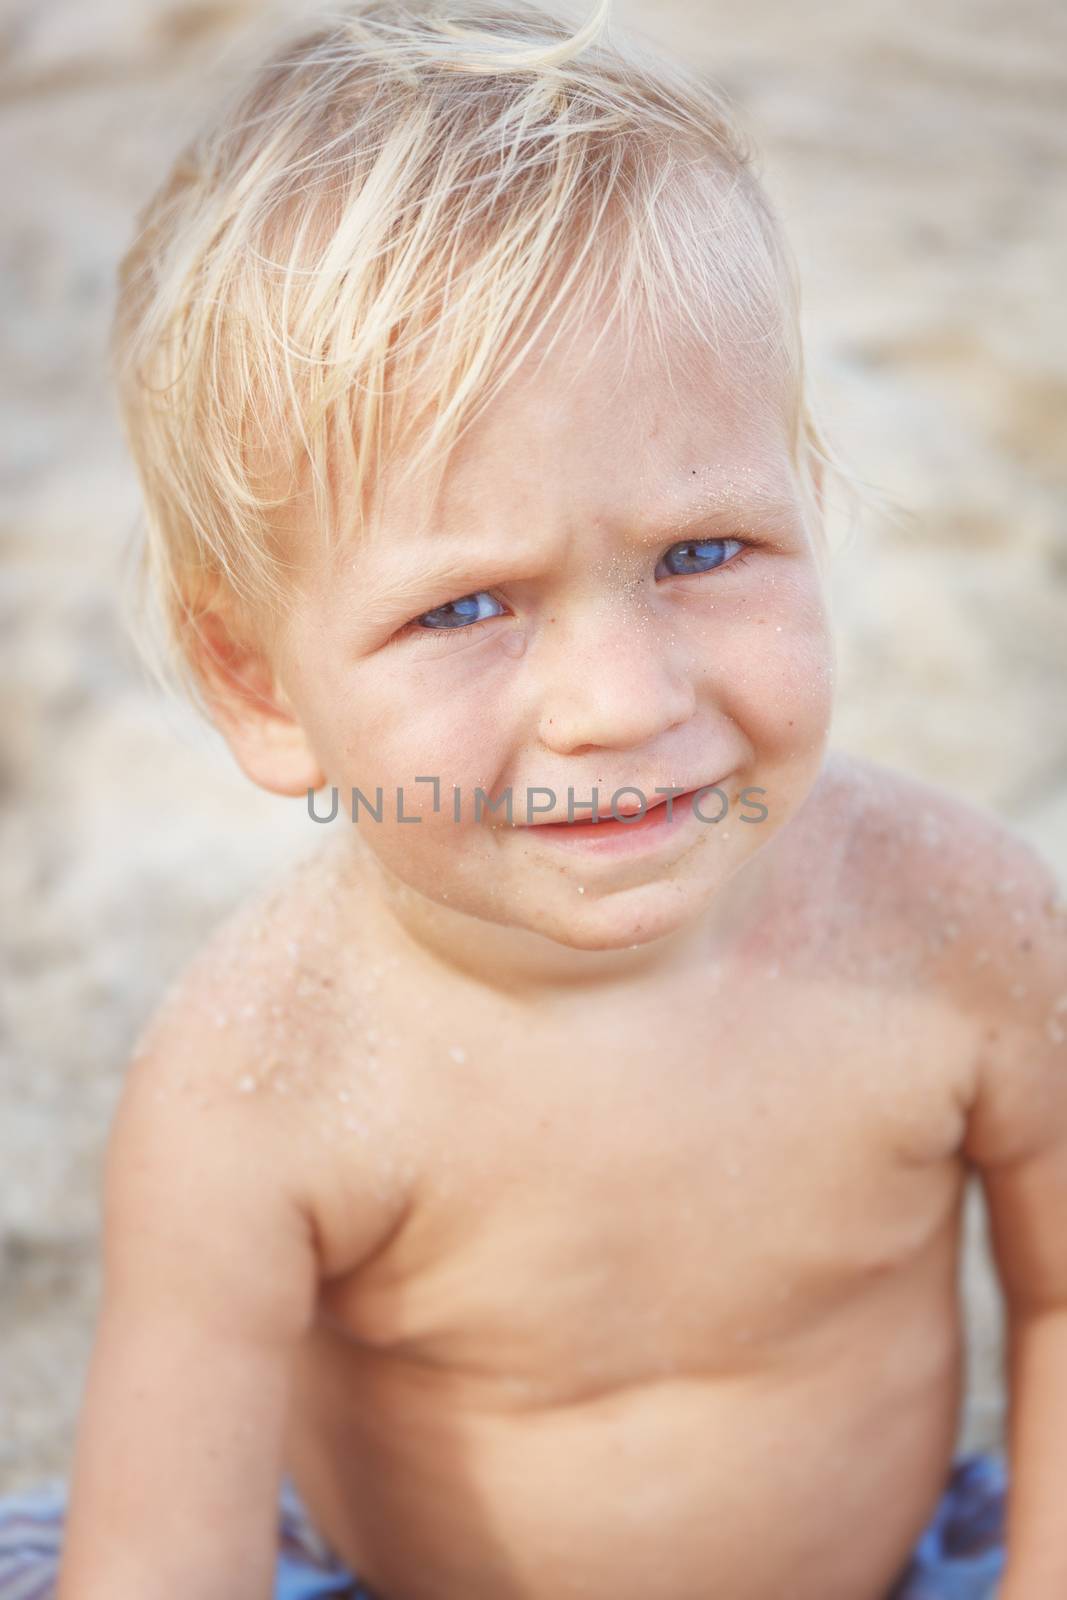 Portrait of a baby with a naked torso on the beach